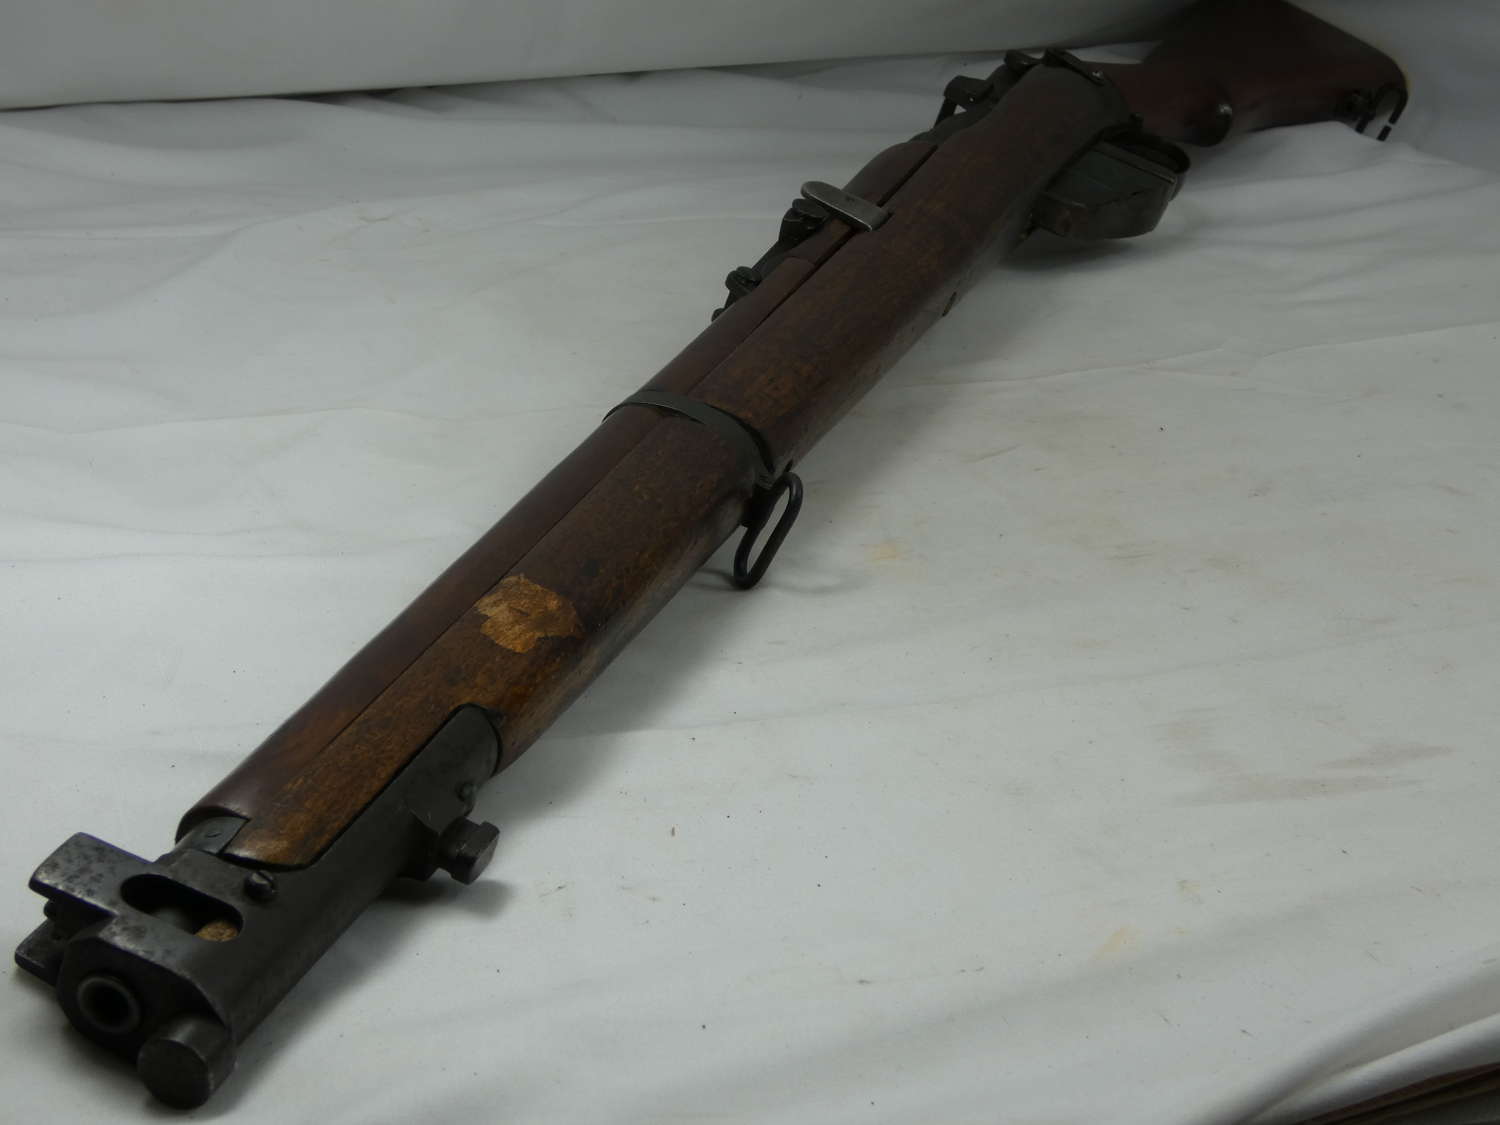 WW2 British Deactivated 1941 SMLE Rifle